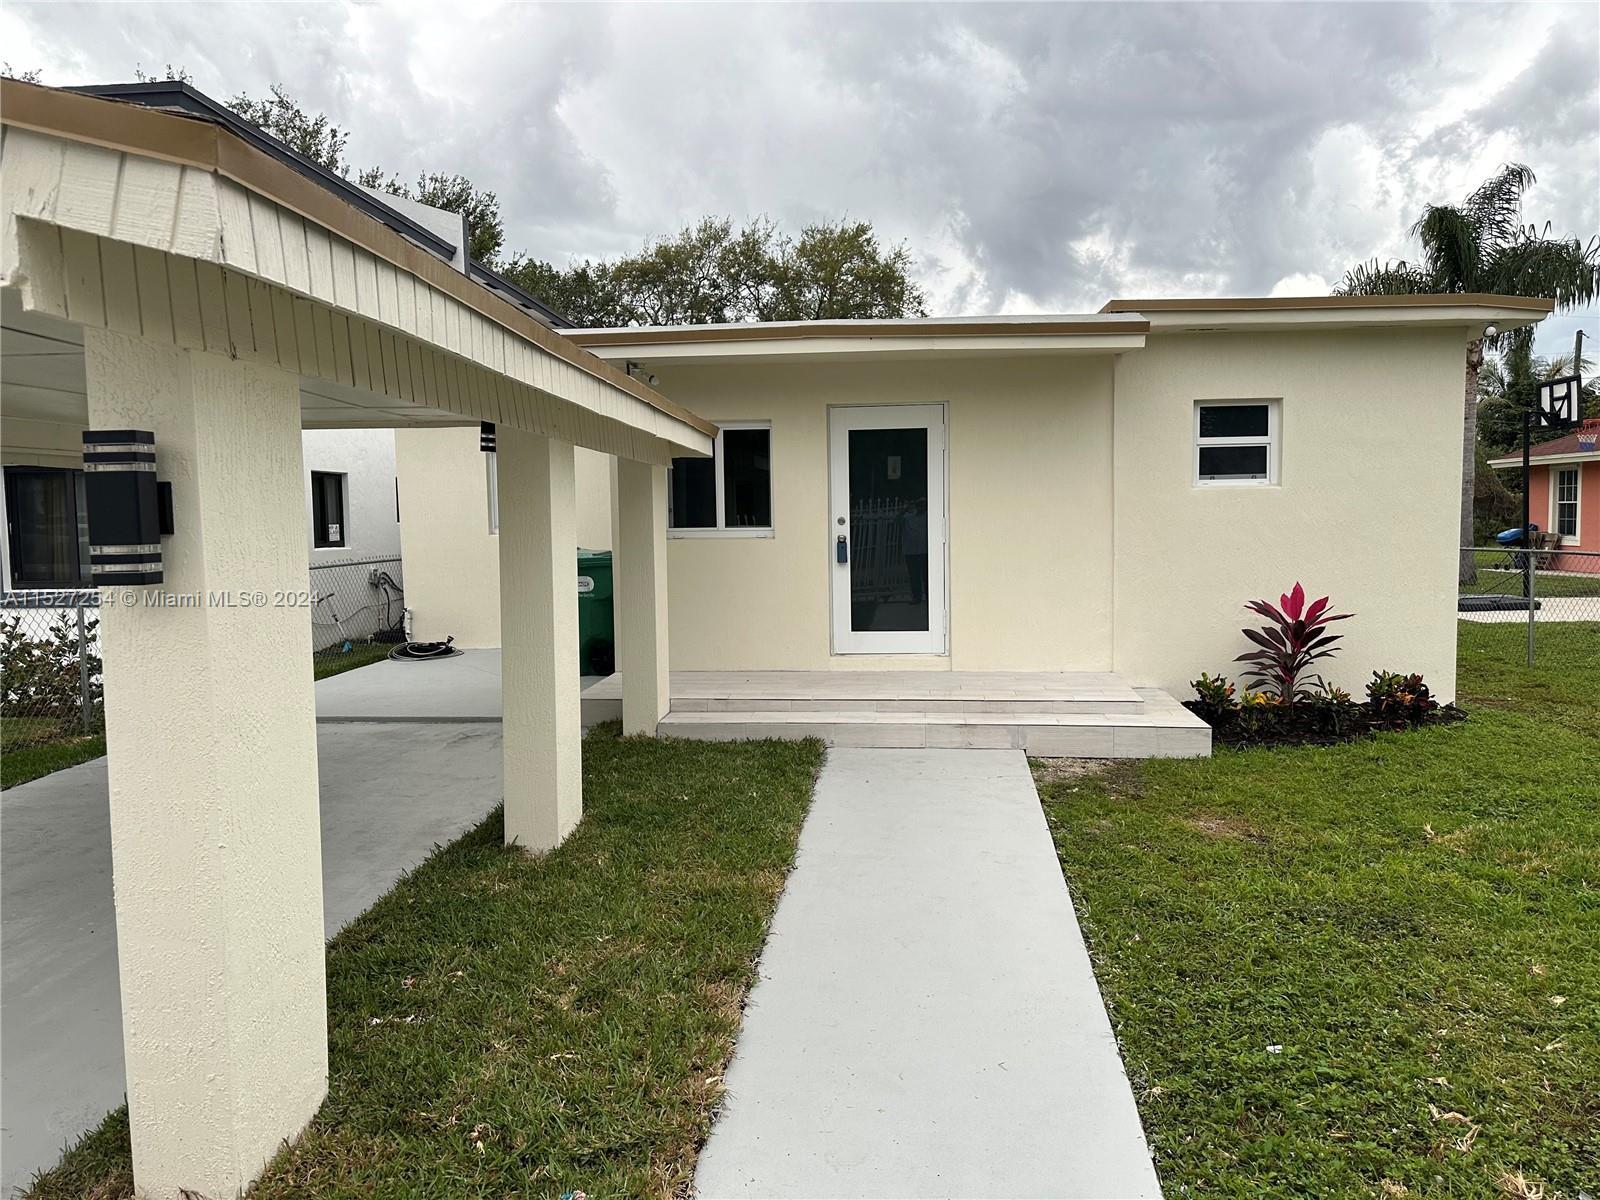 Photo of 2960 NW 57th St in Miami, FL